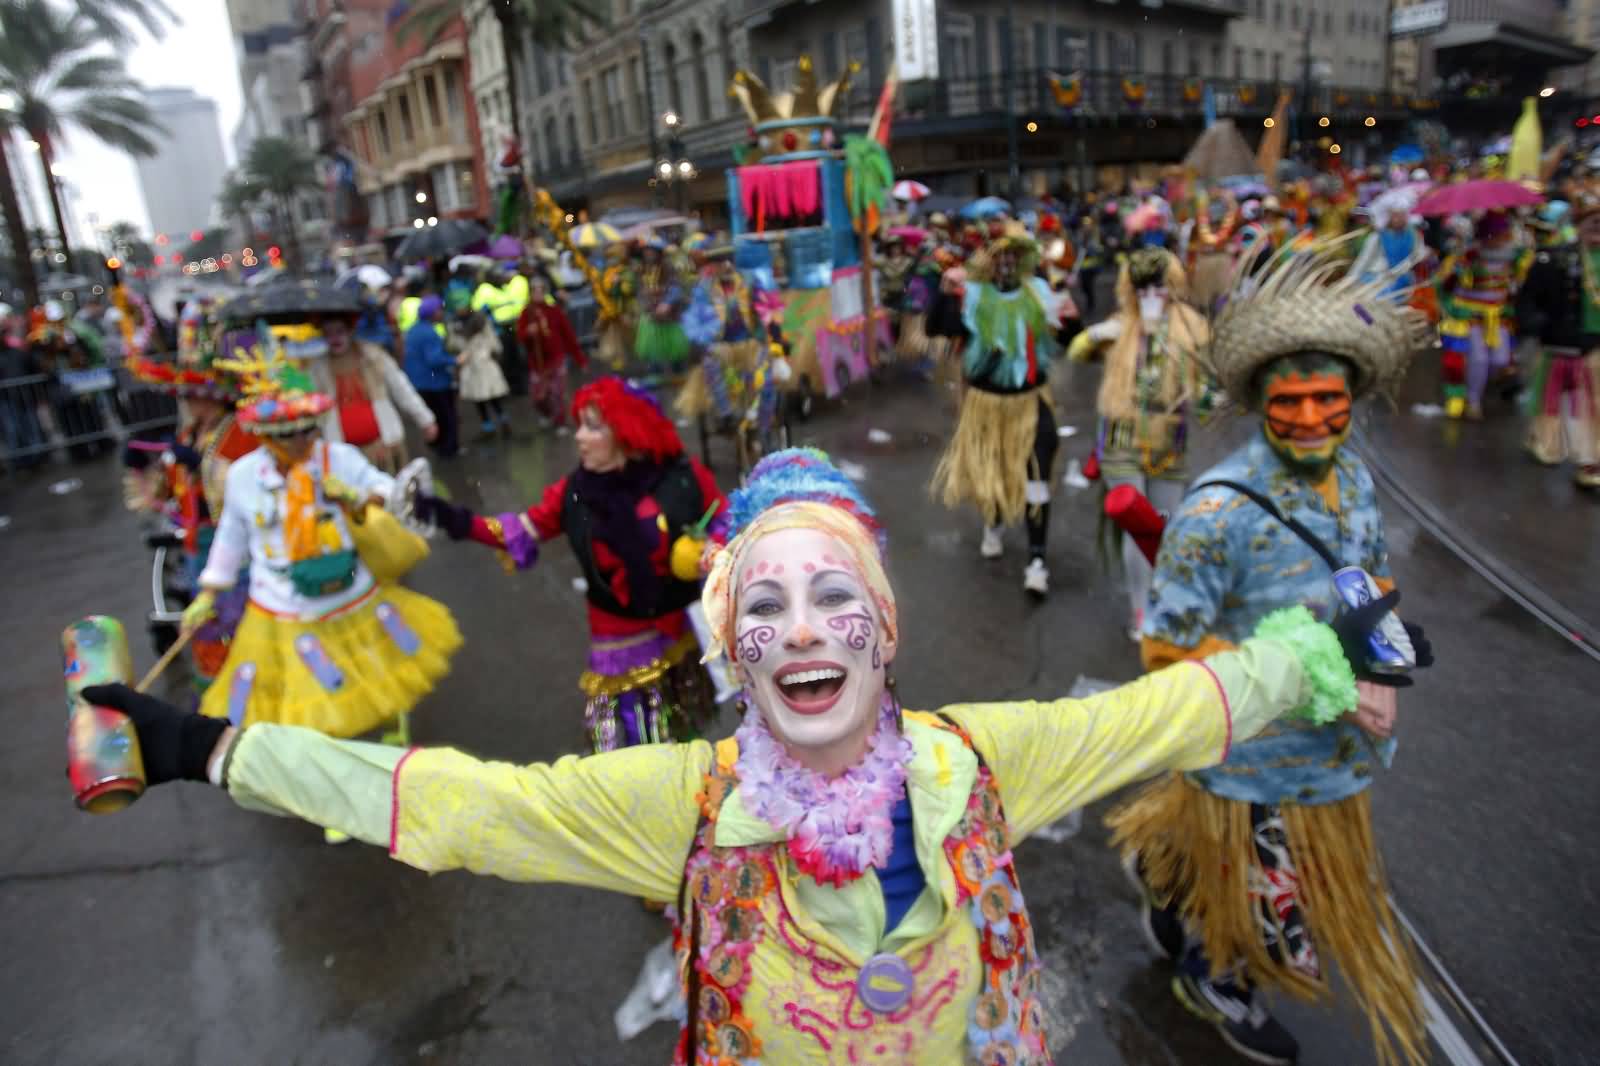 People Of New Orleans Wearing Costumes And Masks During Mardi Gras Parade